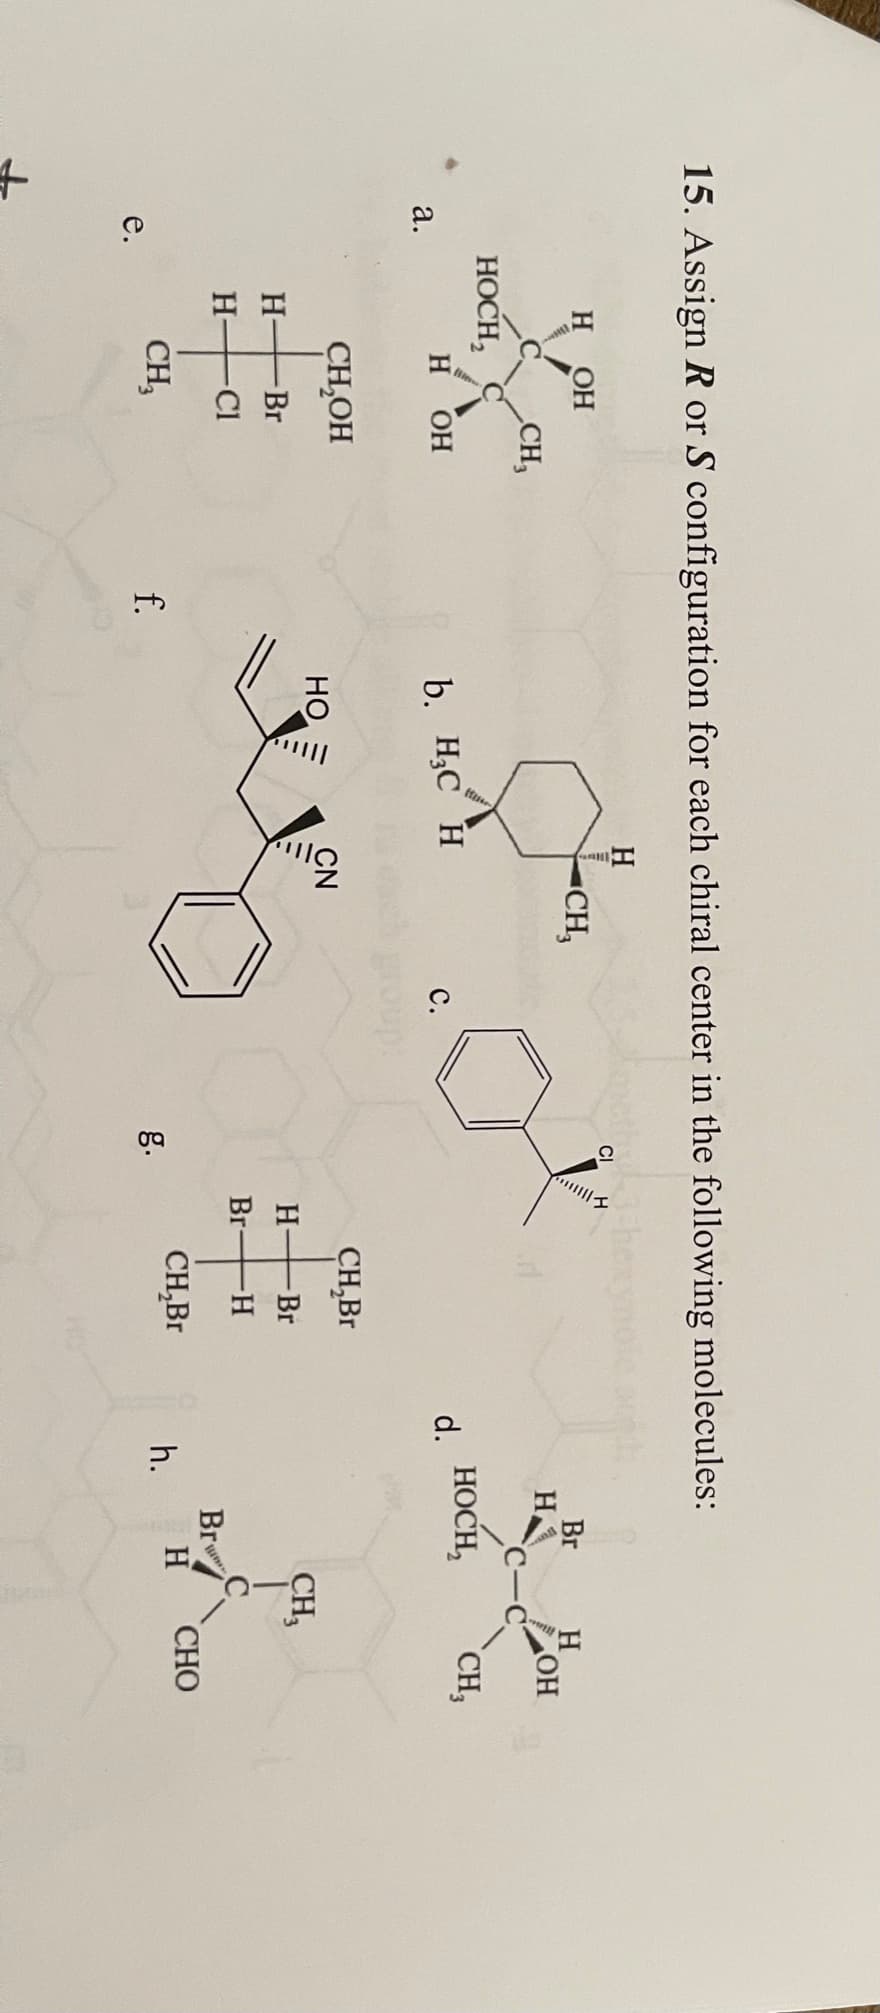 15. Assign R or S configuration for each chiral center in the following molecules:
H
H
OH
CI
▪CH,
Br
H
OH
C-
CH,
HOCH,
н Он
b. H3C H
НОСН,
CH,
а.
с.
d.
CH,OH
CH,Br
HO
CN
H-
-Br
H-
Br
CH,
H-
-Cl
Br H
Br
CH,
f.
CH,Br
h.
H
СНО
е.
g.
